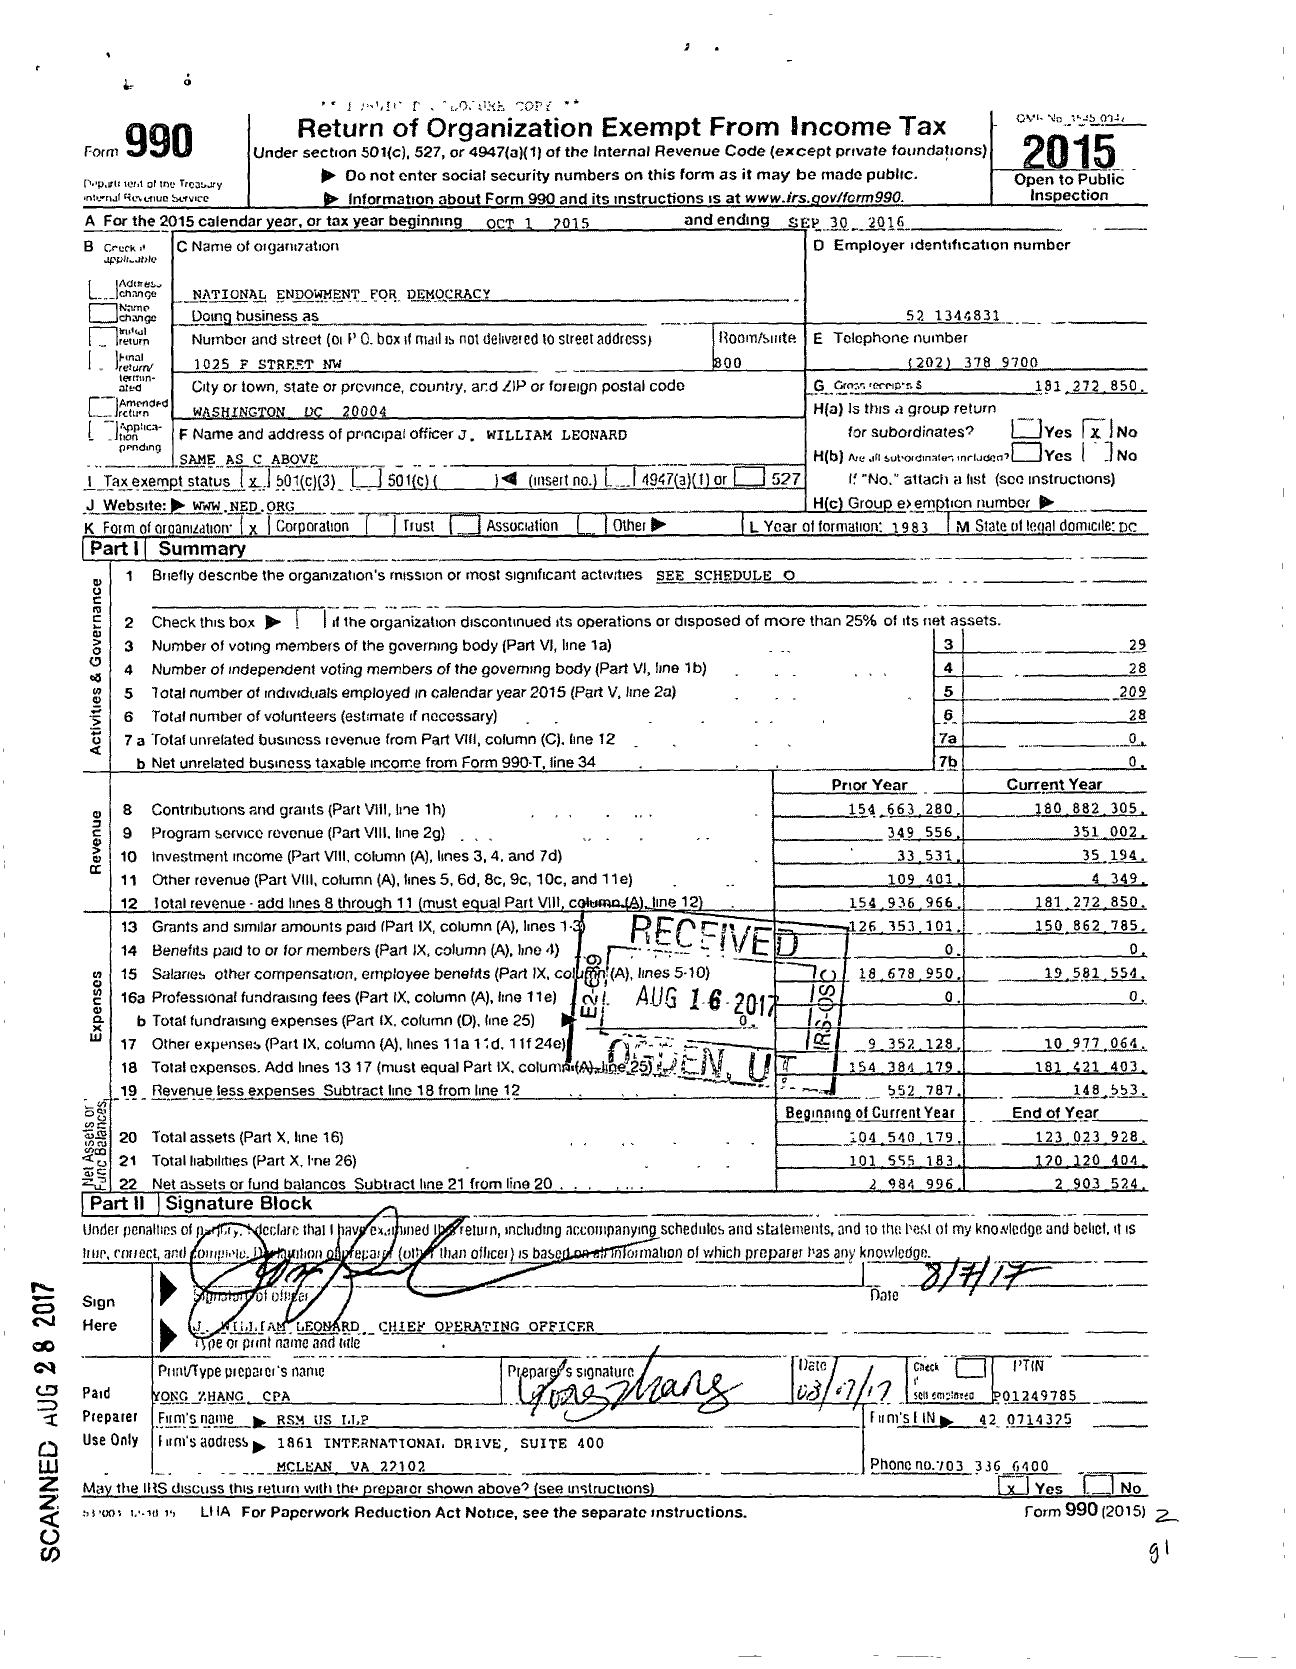 Image of first page of 2015 Form 990 for National Endowment for Democracy